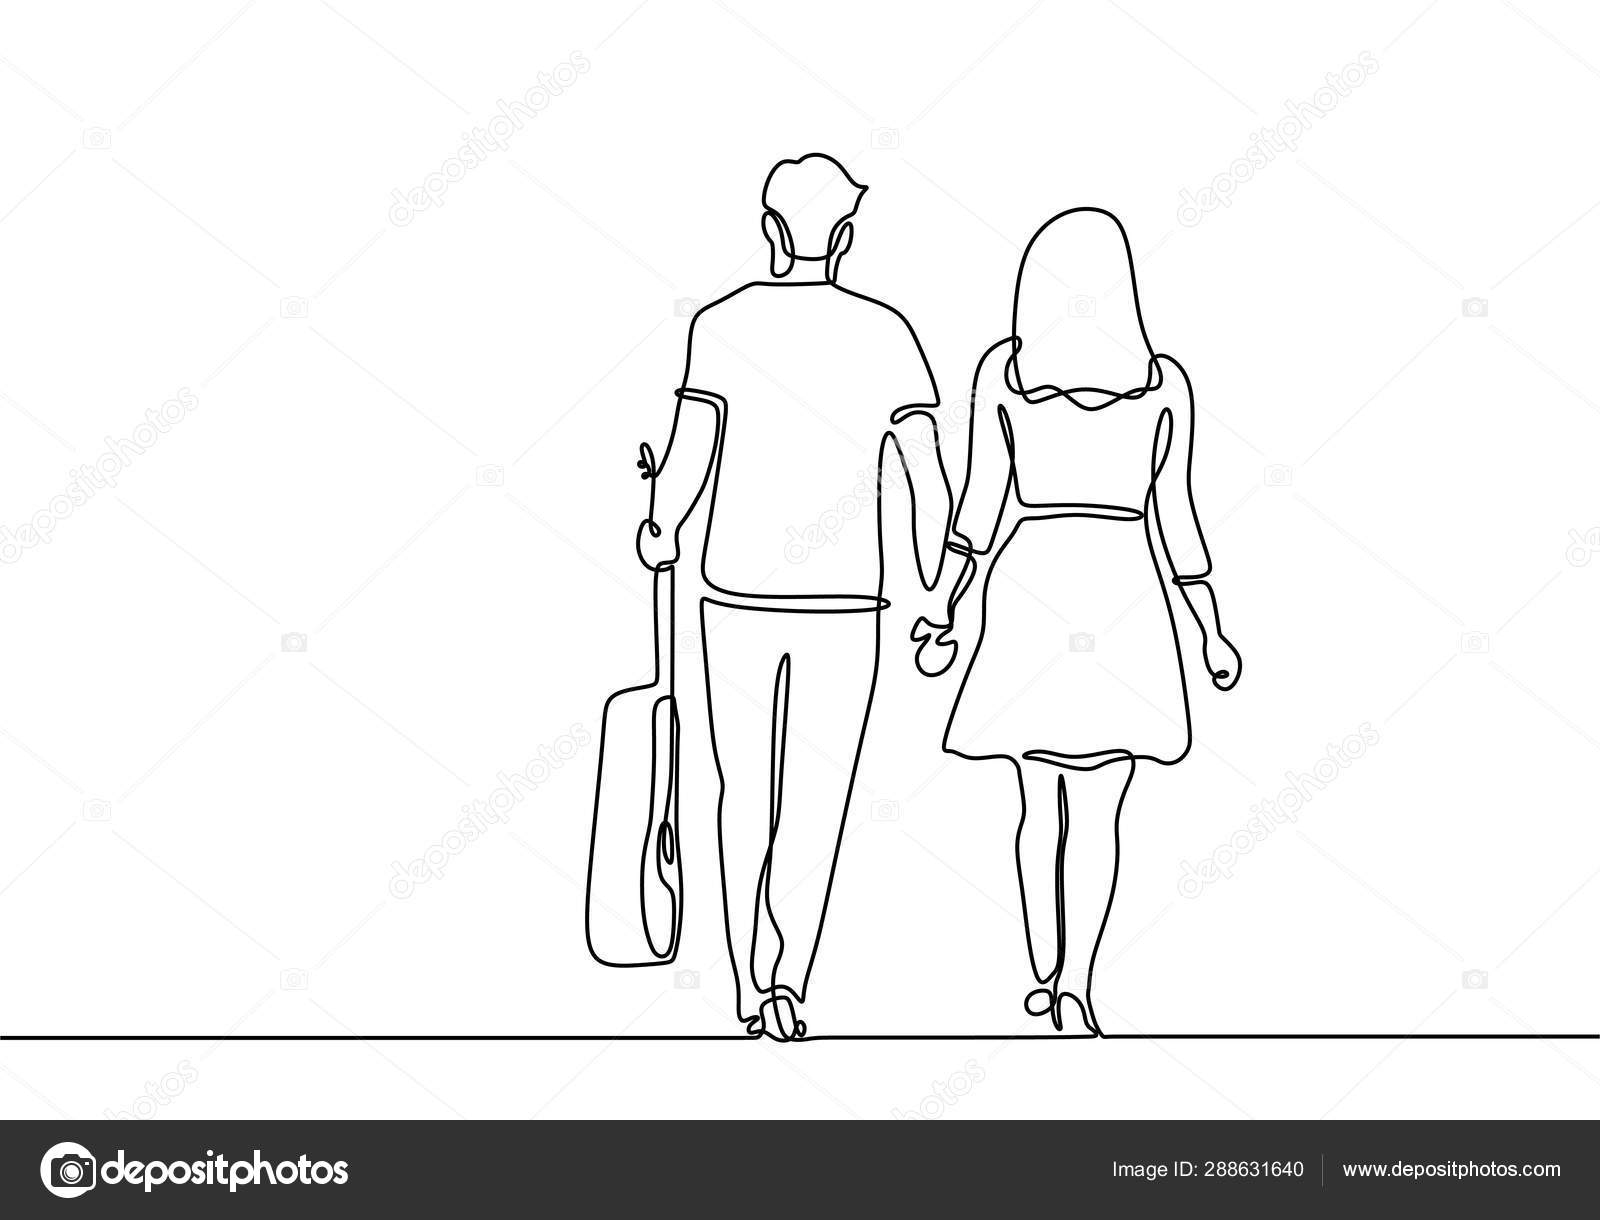 Couple holding hands drawing - Vector - Download Graphics & Vectors